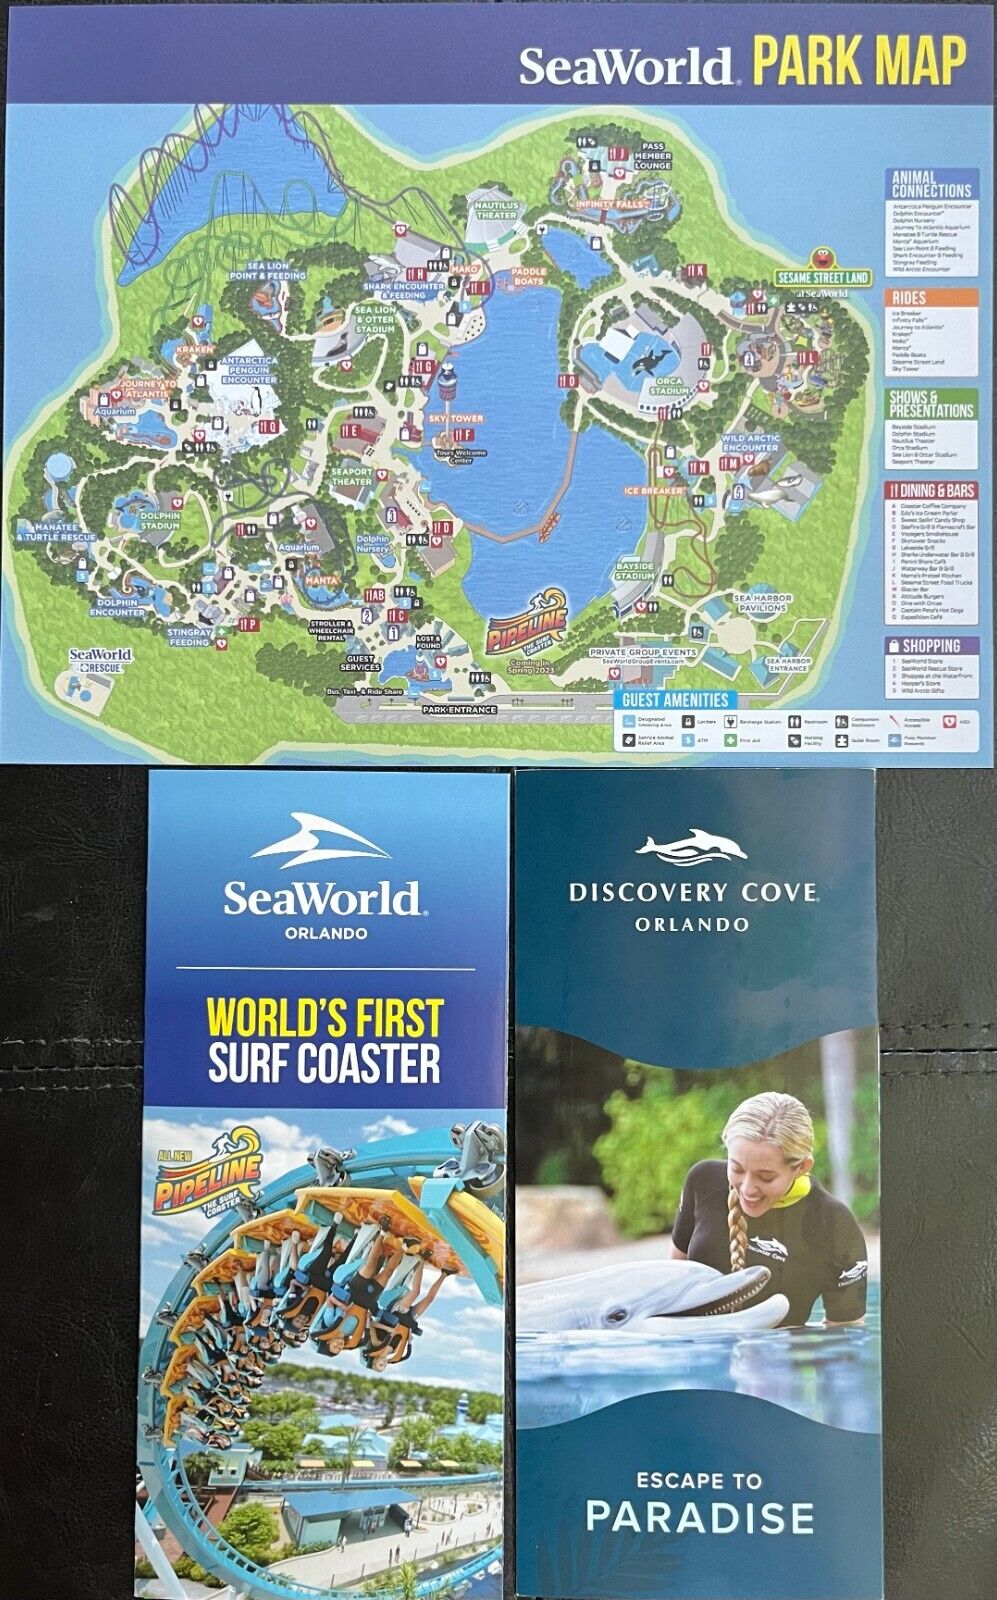 2023 Sea World Orlando Park Guide Map + Sea World and Discovery Cove Brochures